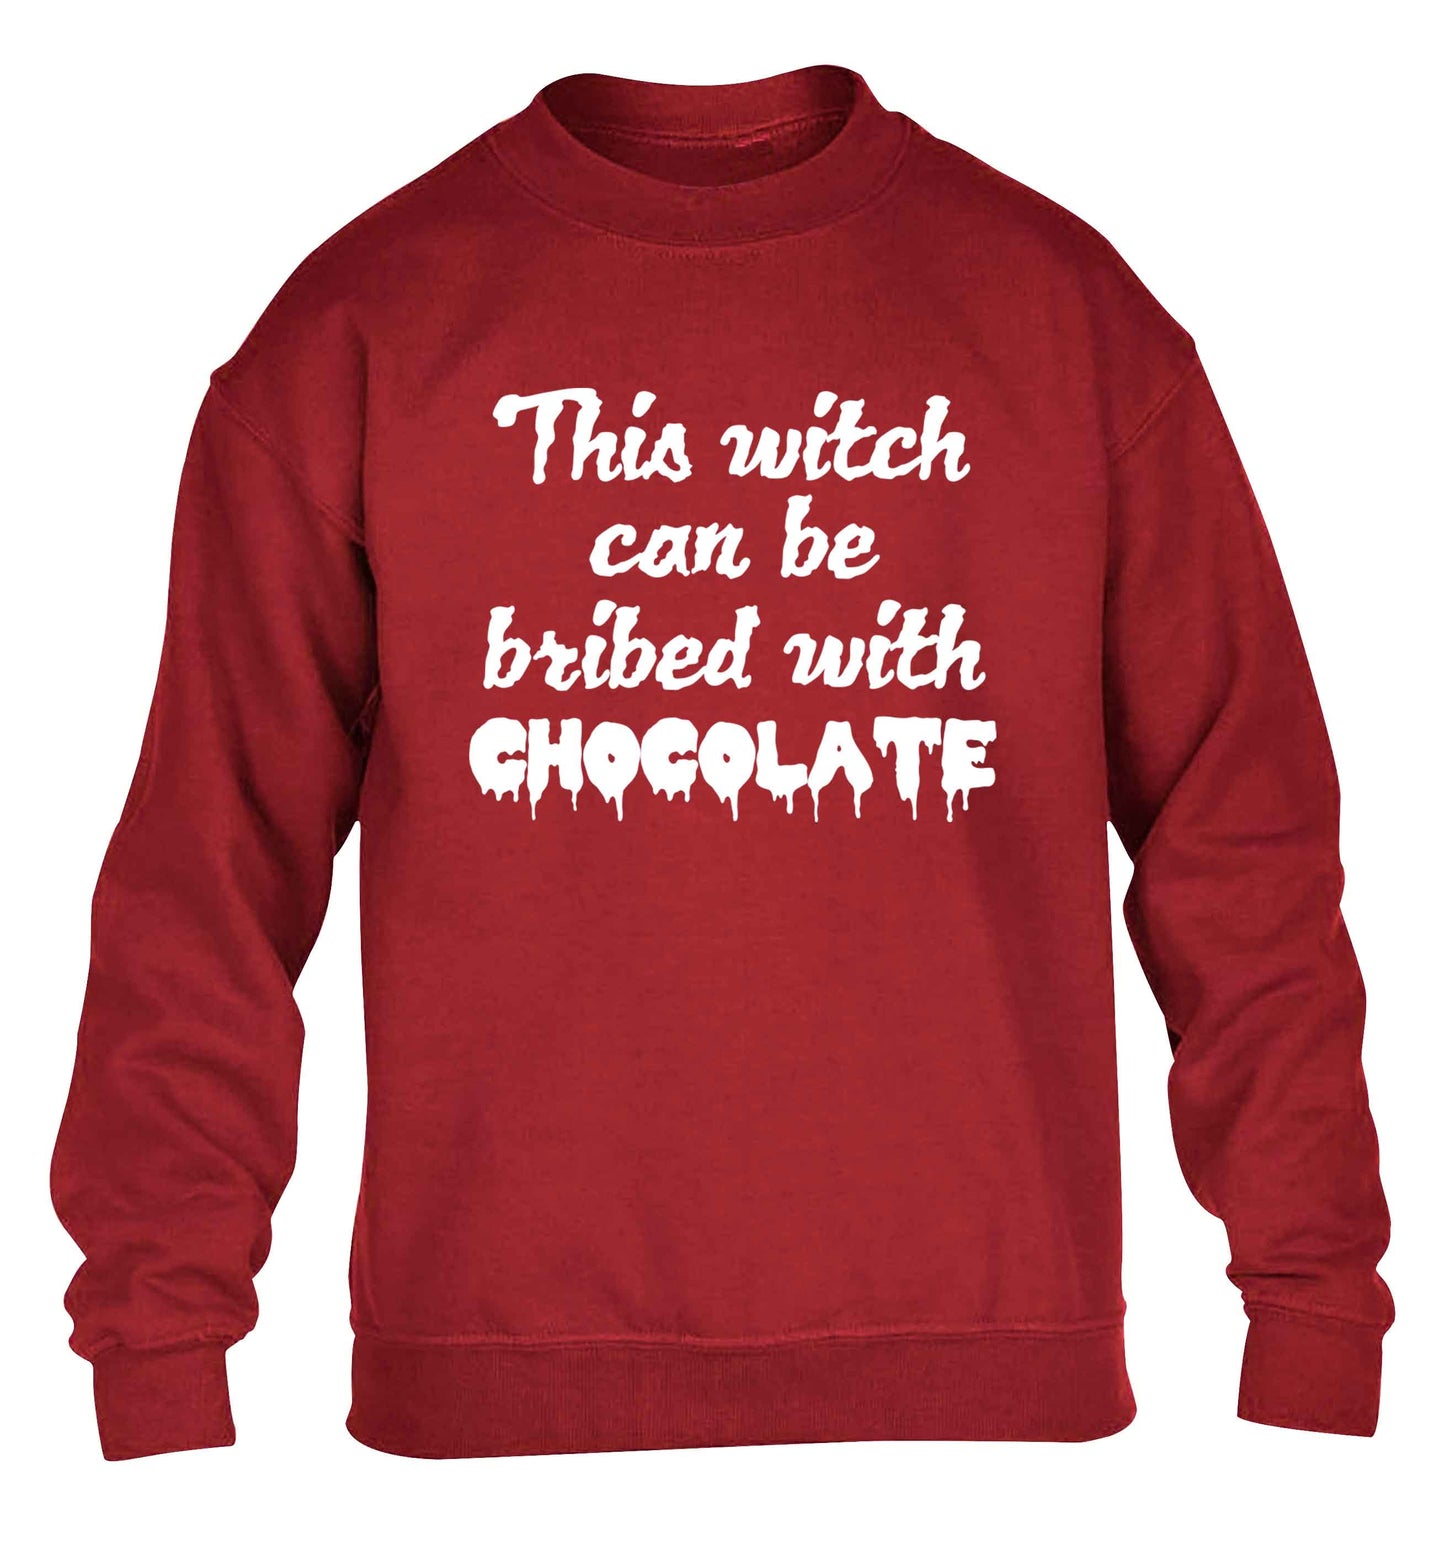 This witch can be bribed with chocolate children's grey sweater 12-13 Years